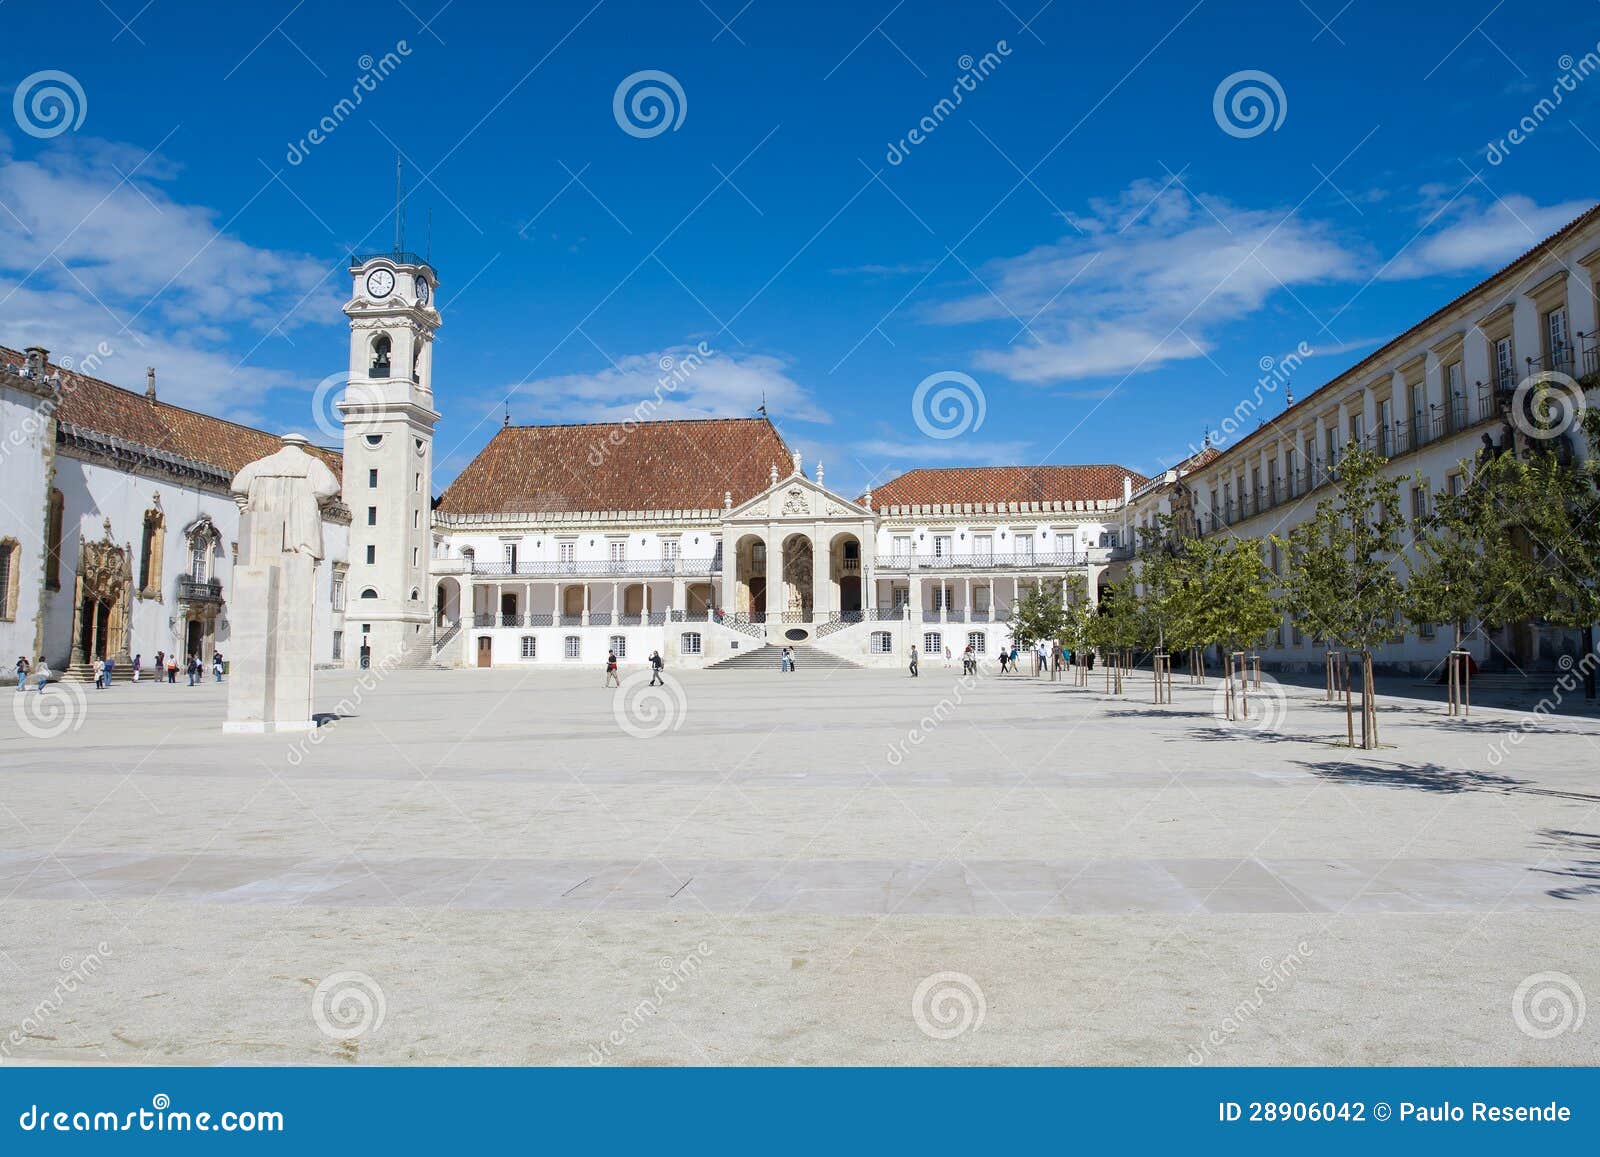 faculty of philosophy at university of coimbra